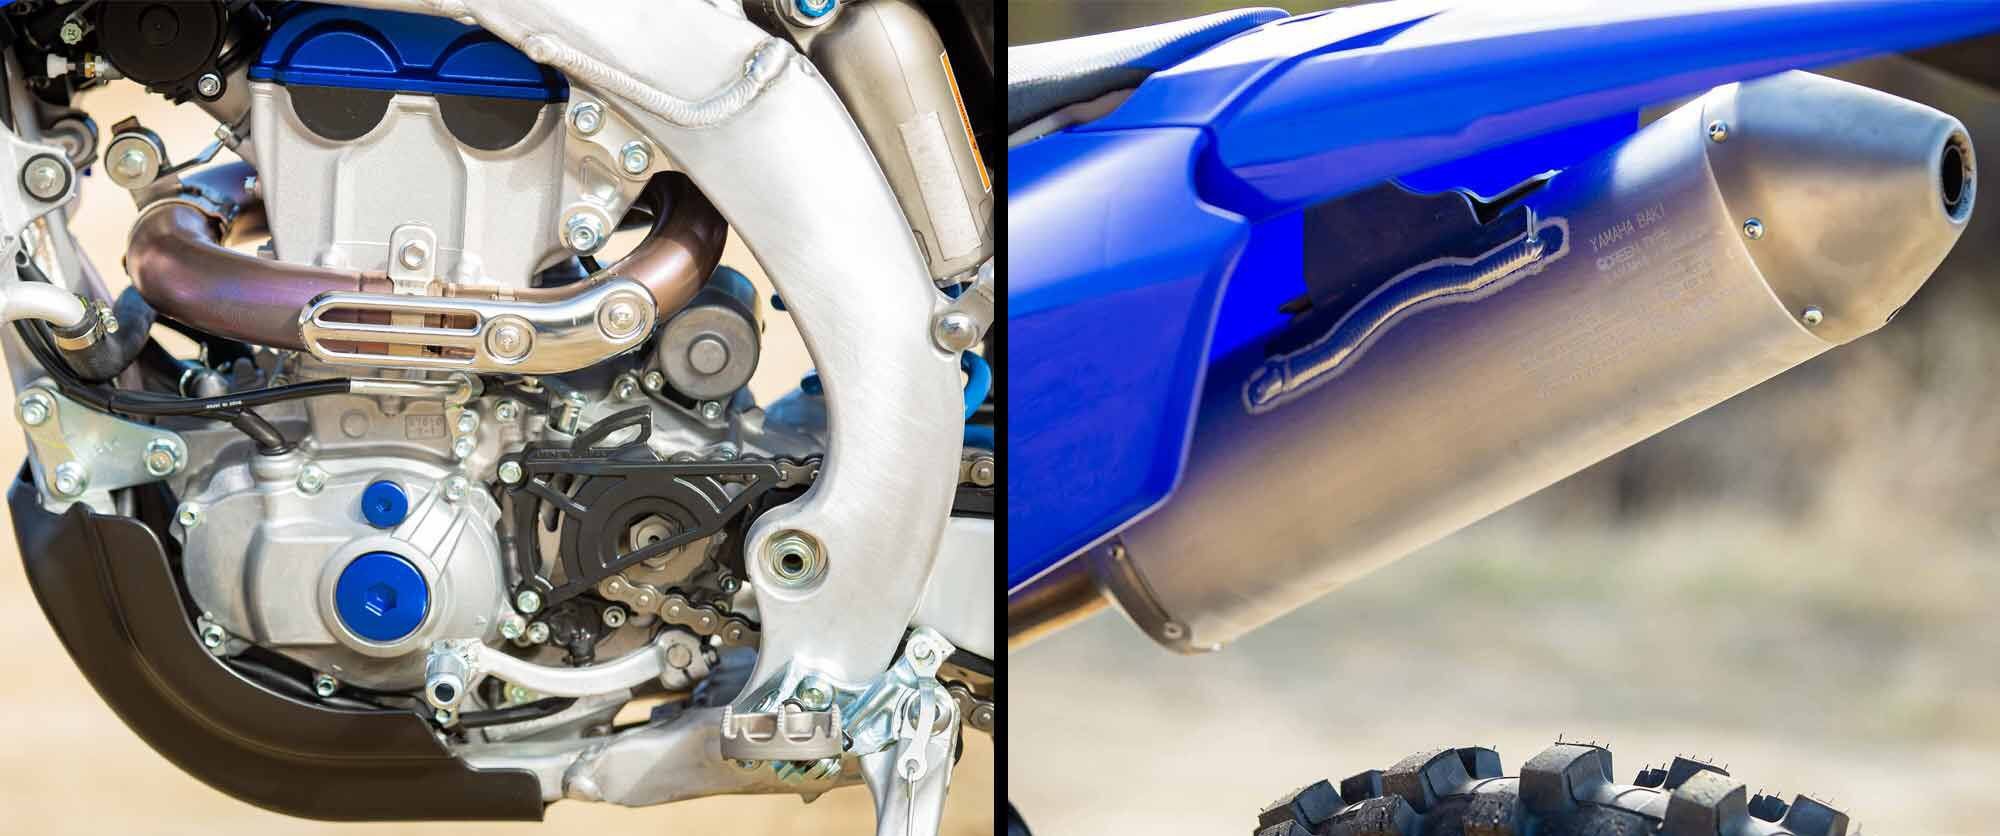 Aside from the ECU tuning and Forestry Service-compliant spark arrestor-type muffler, the WR250F’s engine package is the same as the YZ250FX’s. Our only gripe about the powerplant is that it’s a little hard to start when in gear.